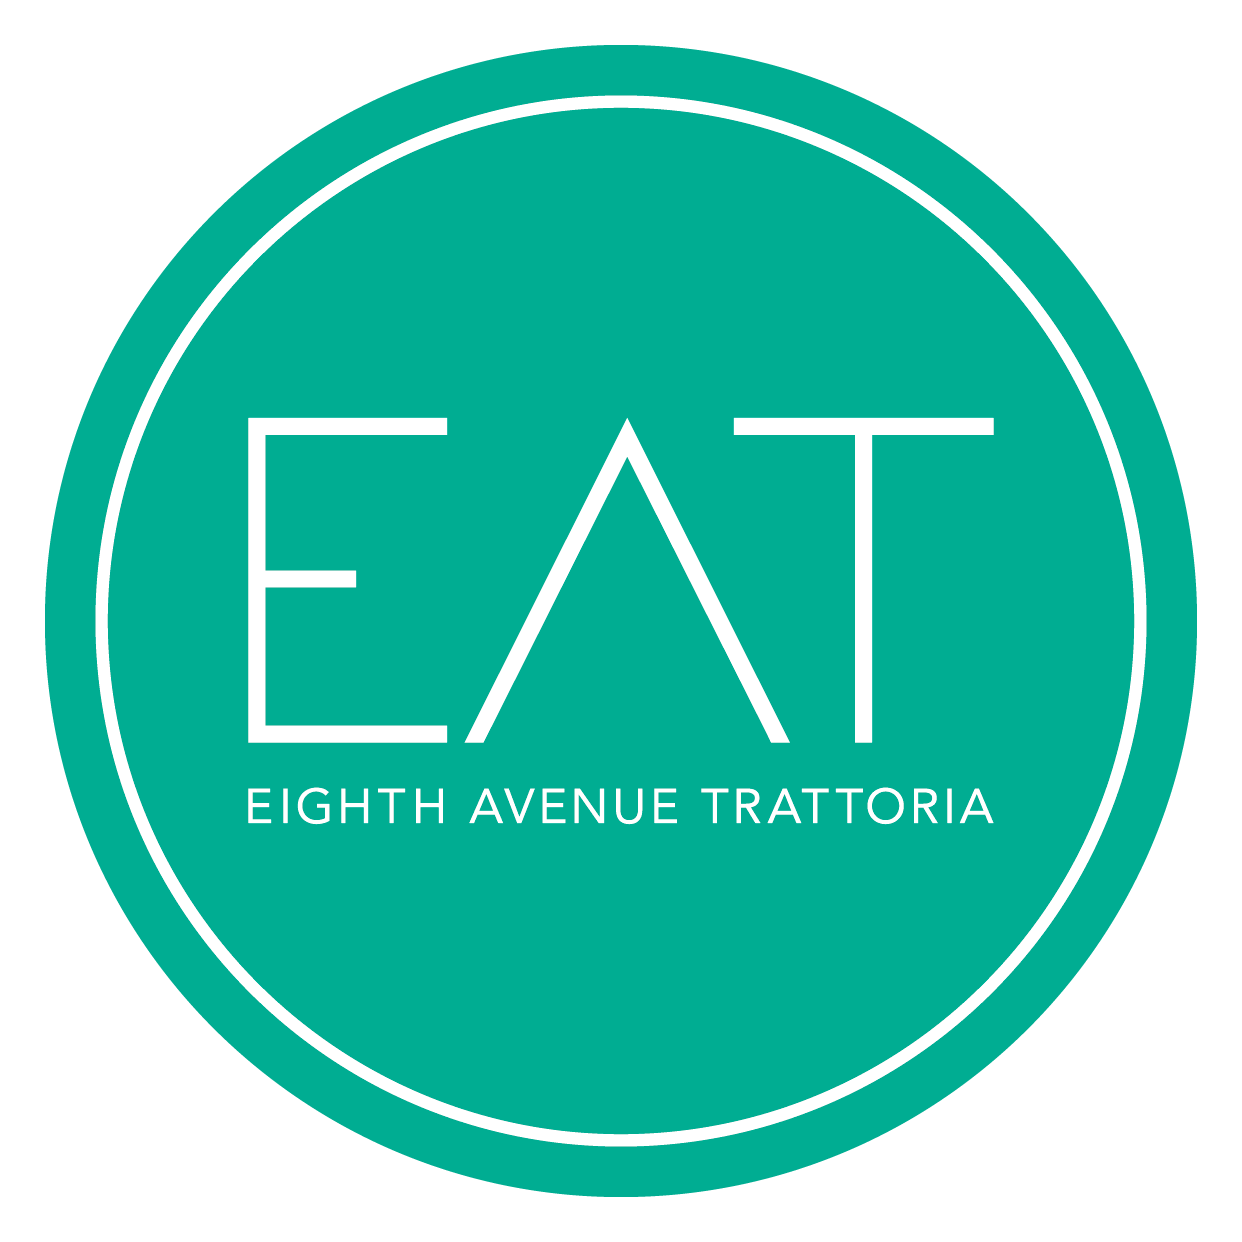 EAT - Eighth Avenue Trattoria (8th Ave)-